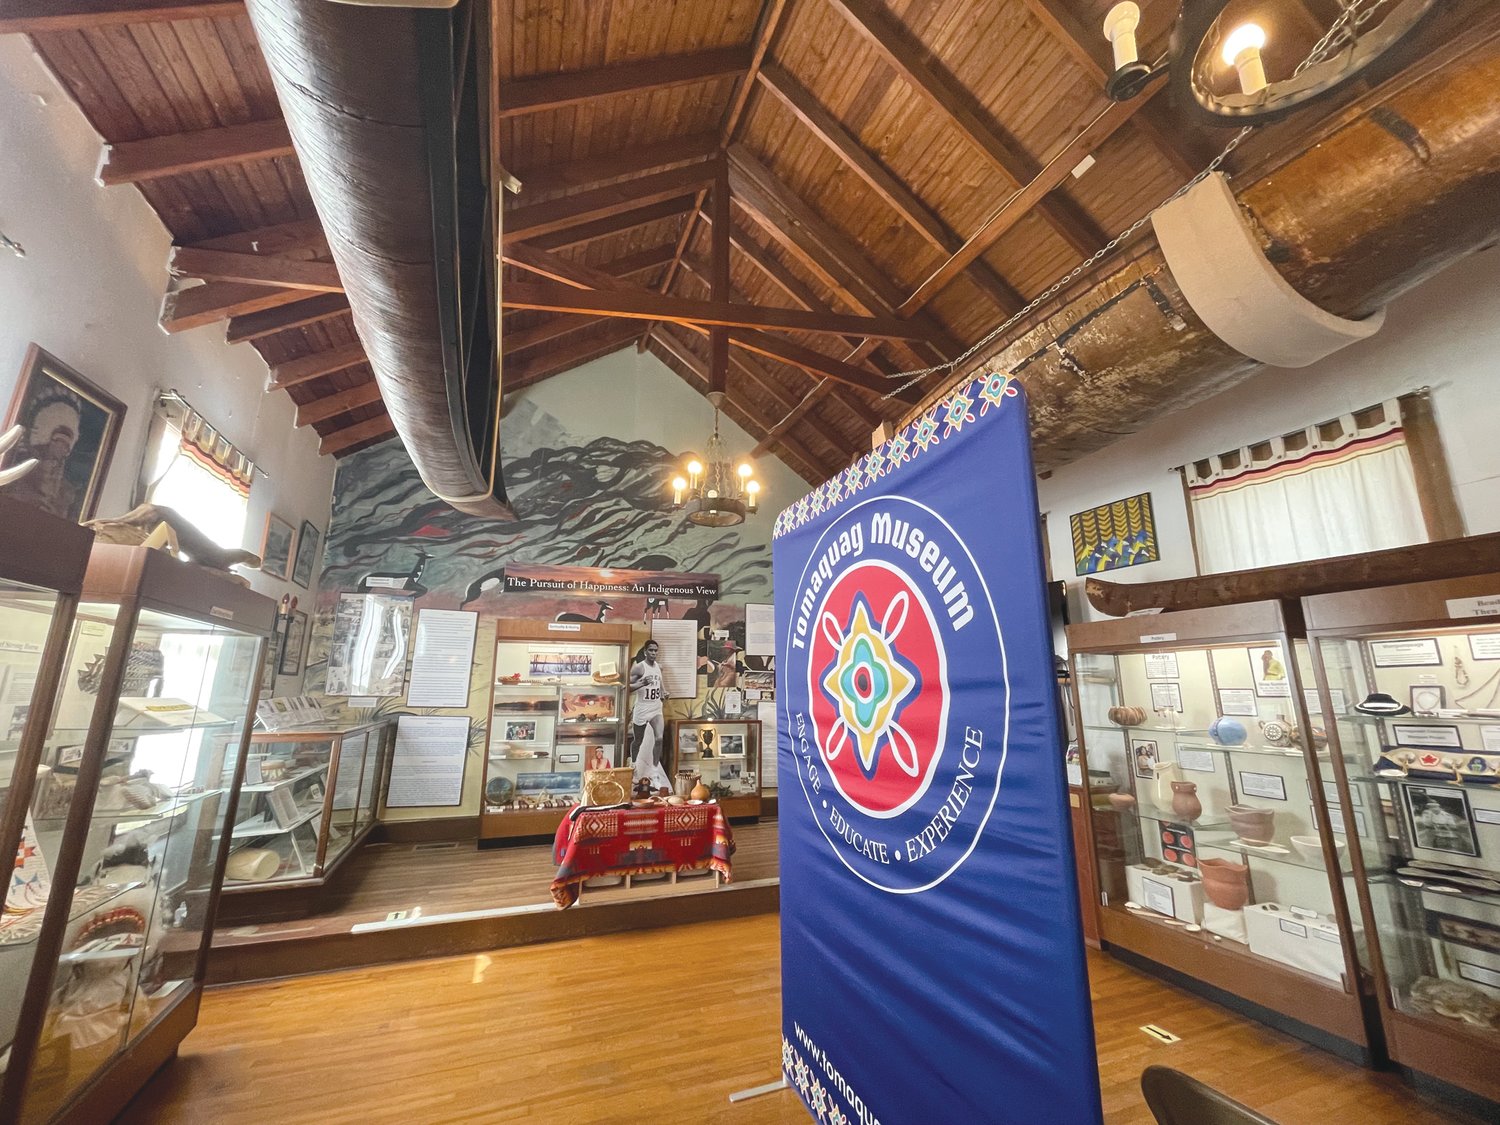 LOOKING FORWARD: The Tomaquag Museum in Exeter displays Native American
artifacts alongside more contemporary pieces to show “the continuation of
culture and community.”